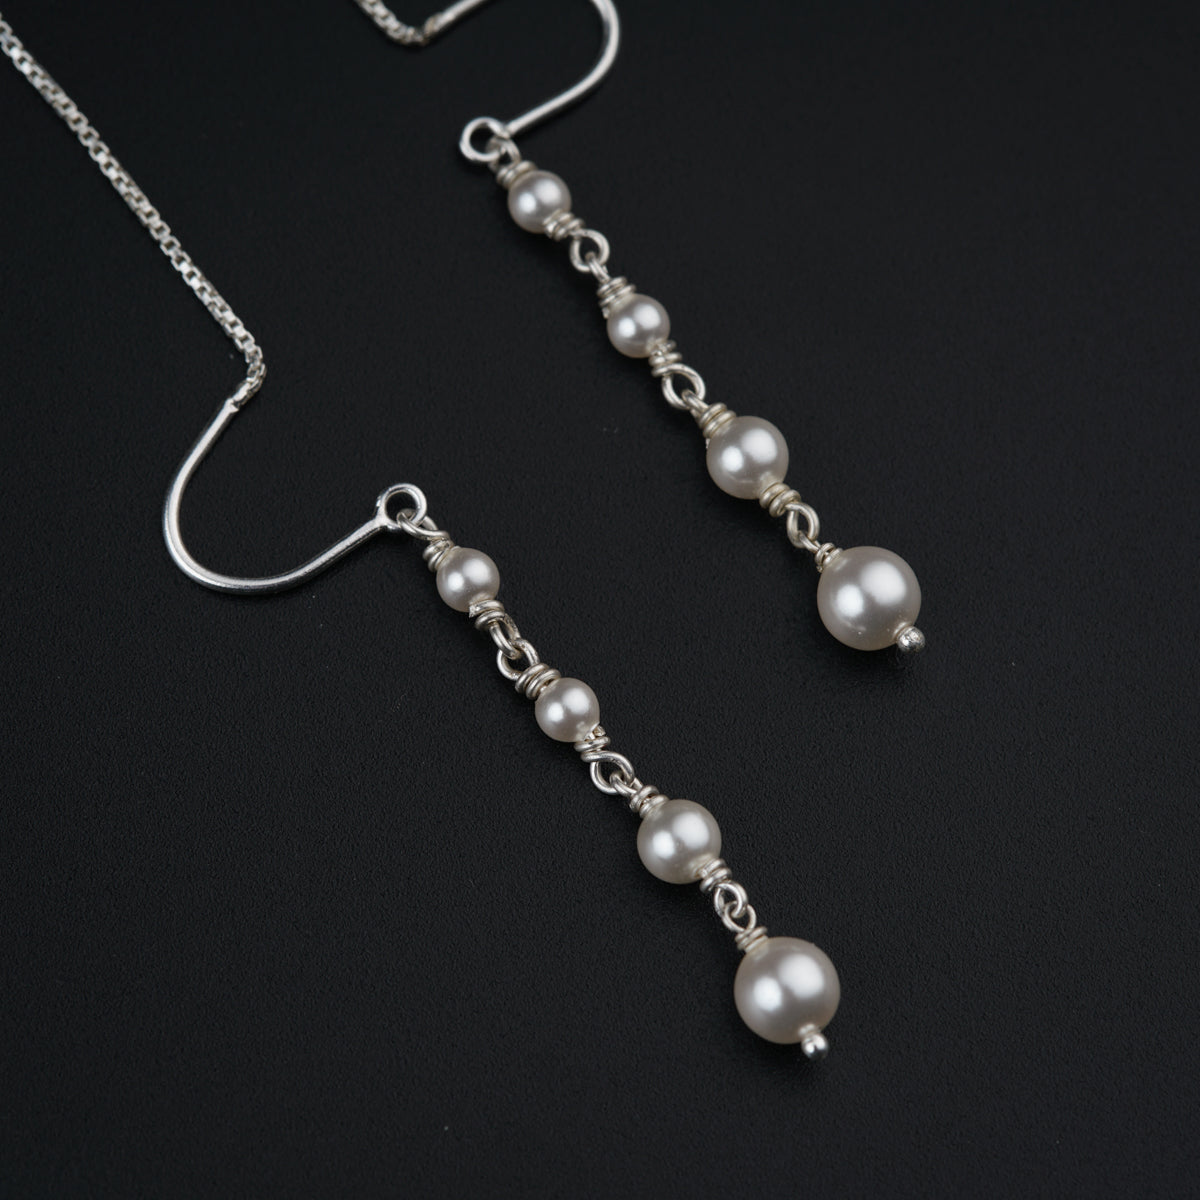 a pair of earrings with pearls hanging from a chain